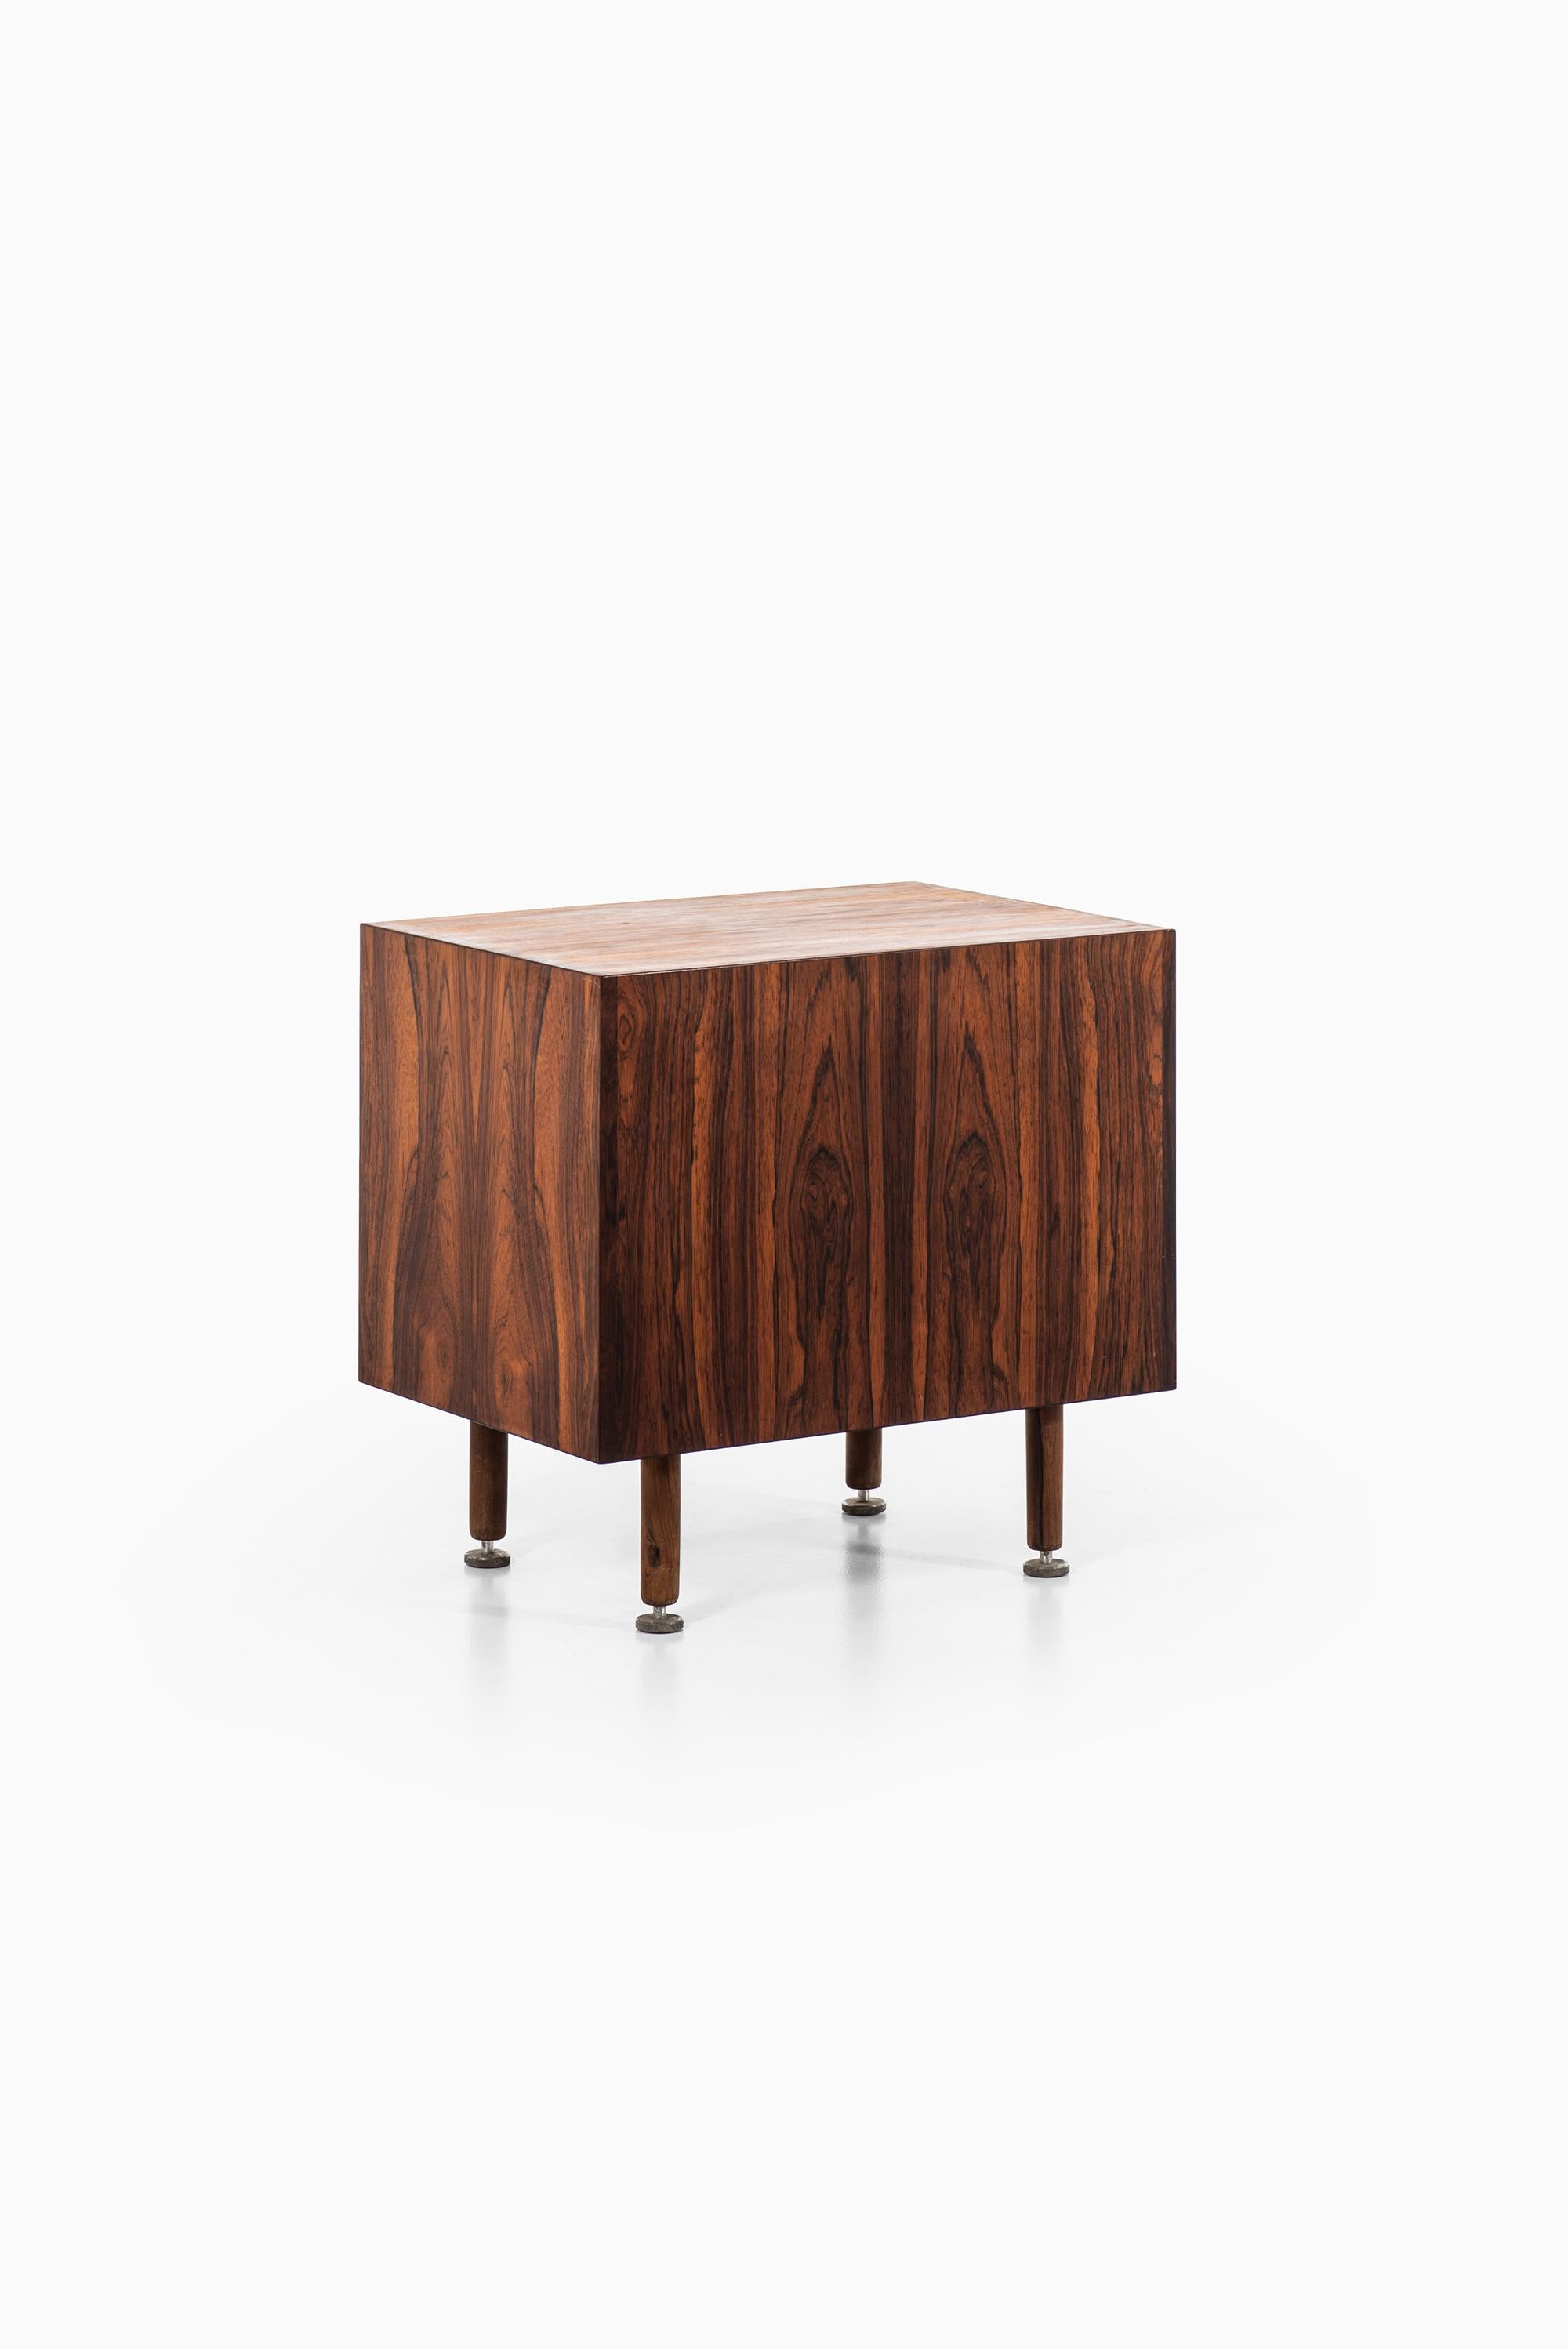 Mid-20th Century Jens Risom Cabinet in Rosewood Produced by Gutenberghus in Denmark For Sale